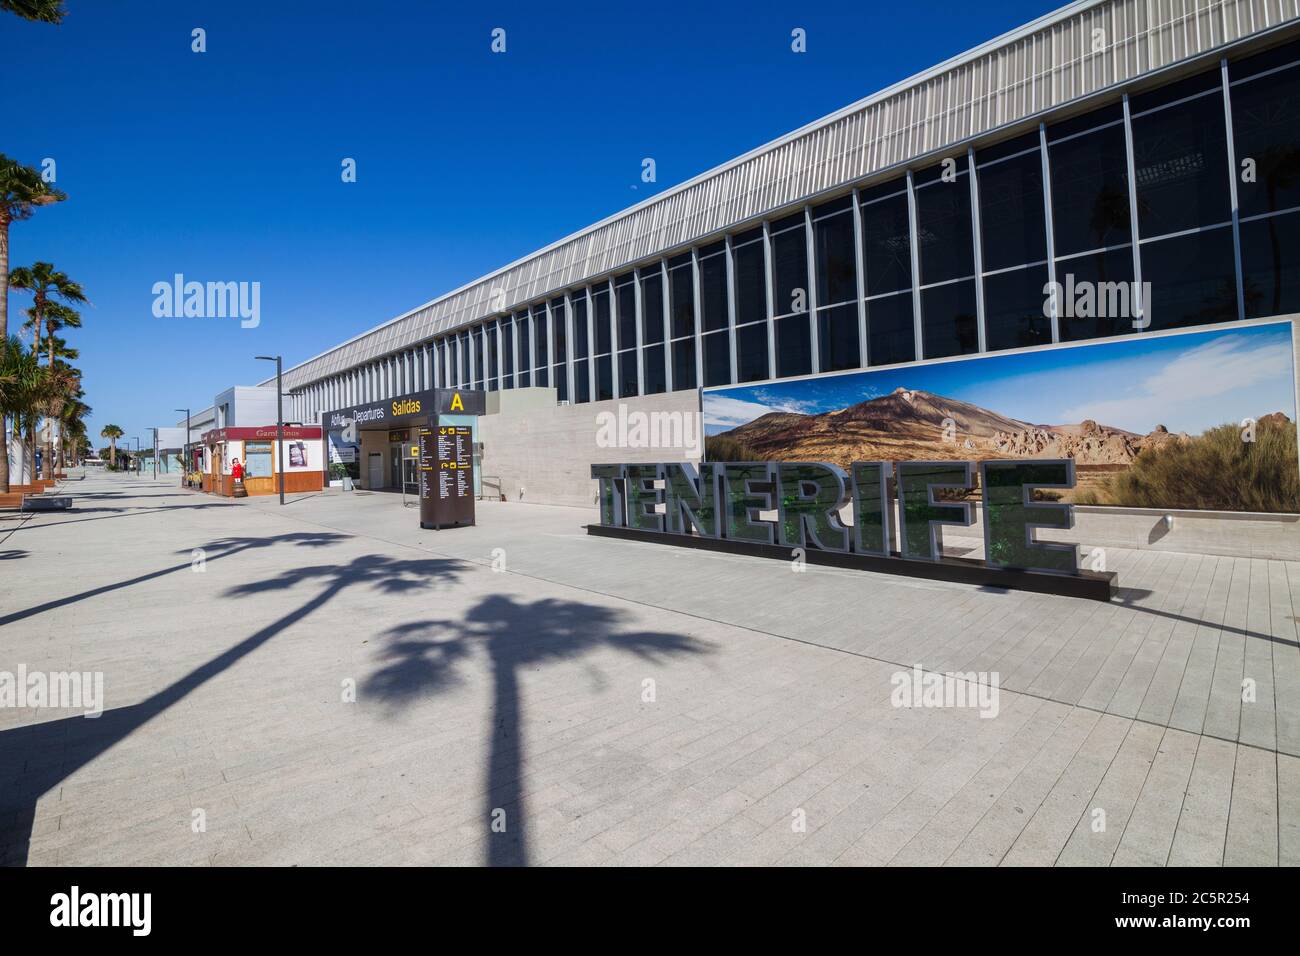 Empty terminal Tenerife South airport due to coronavirus Covid-19 outbreak travel restrictions. Spain's & Canary Islands tourism industry crisis Stock Photo